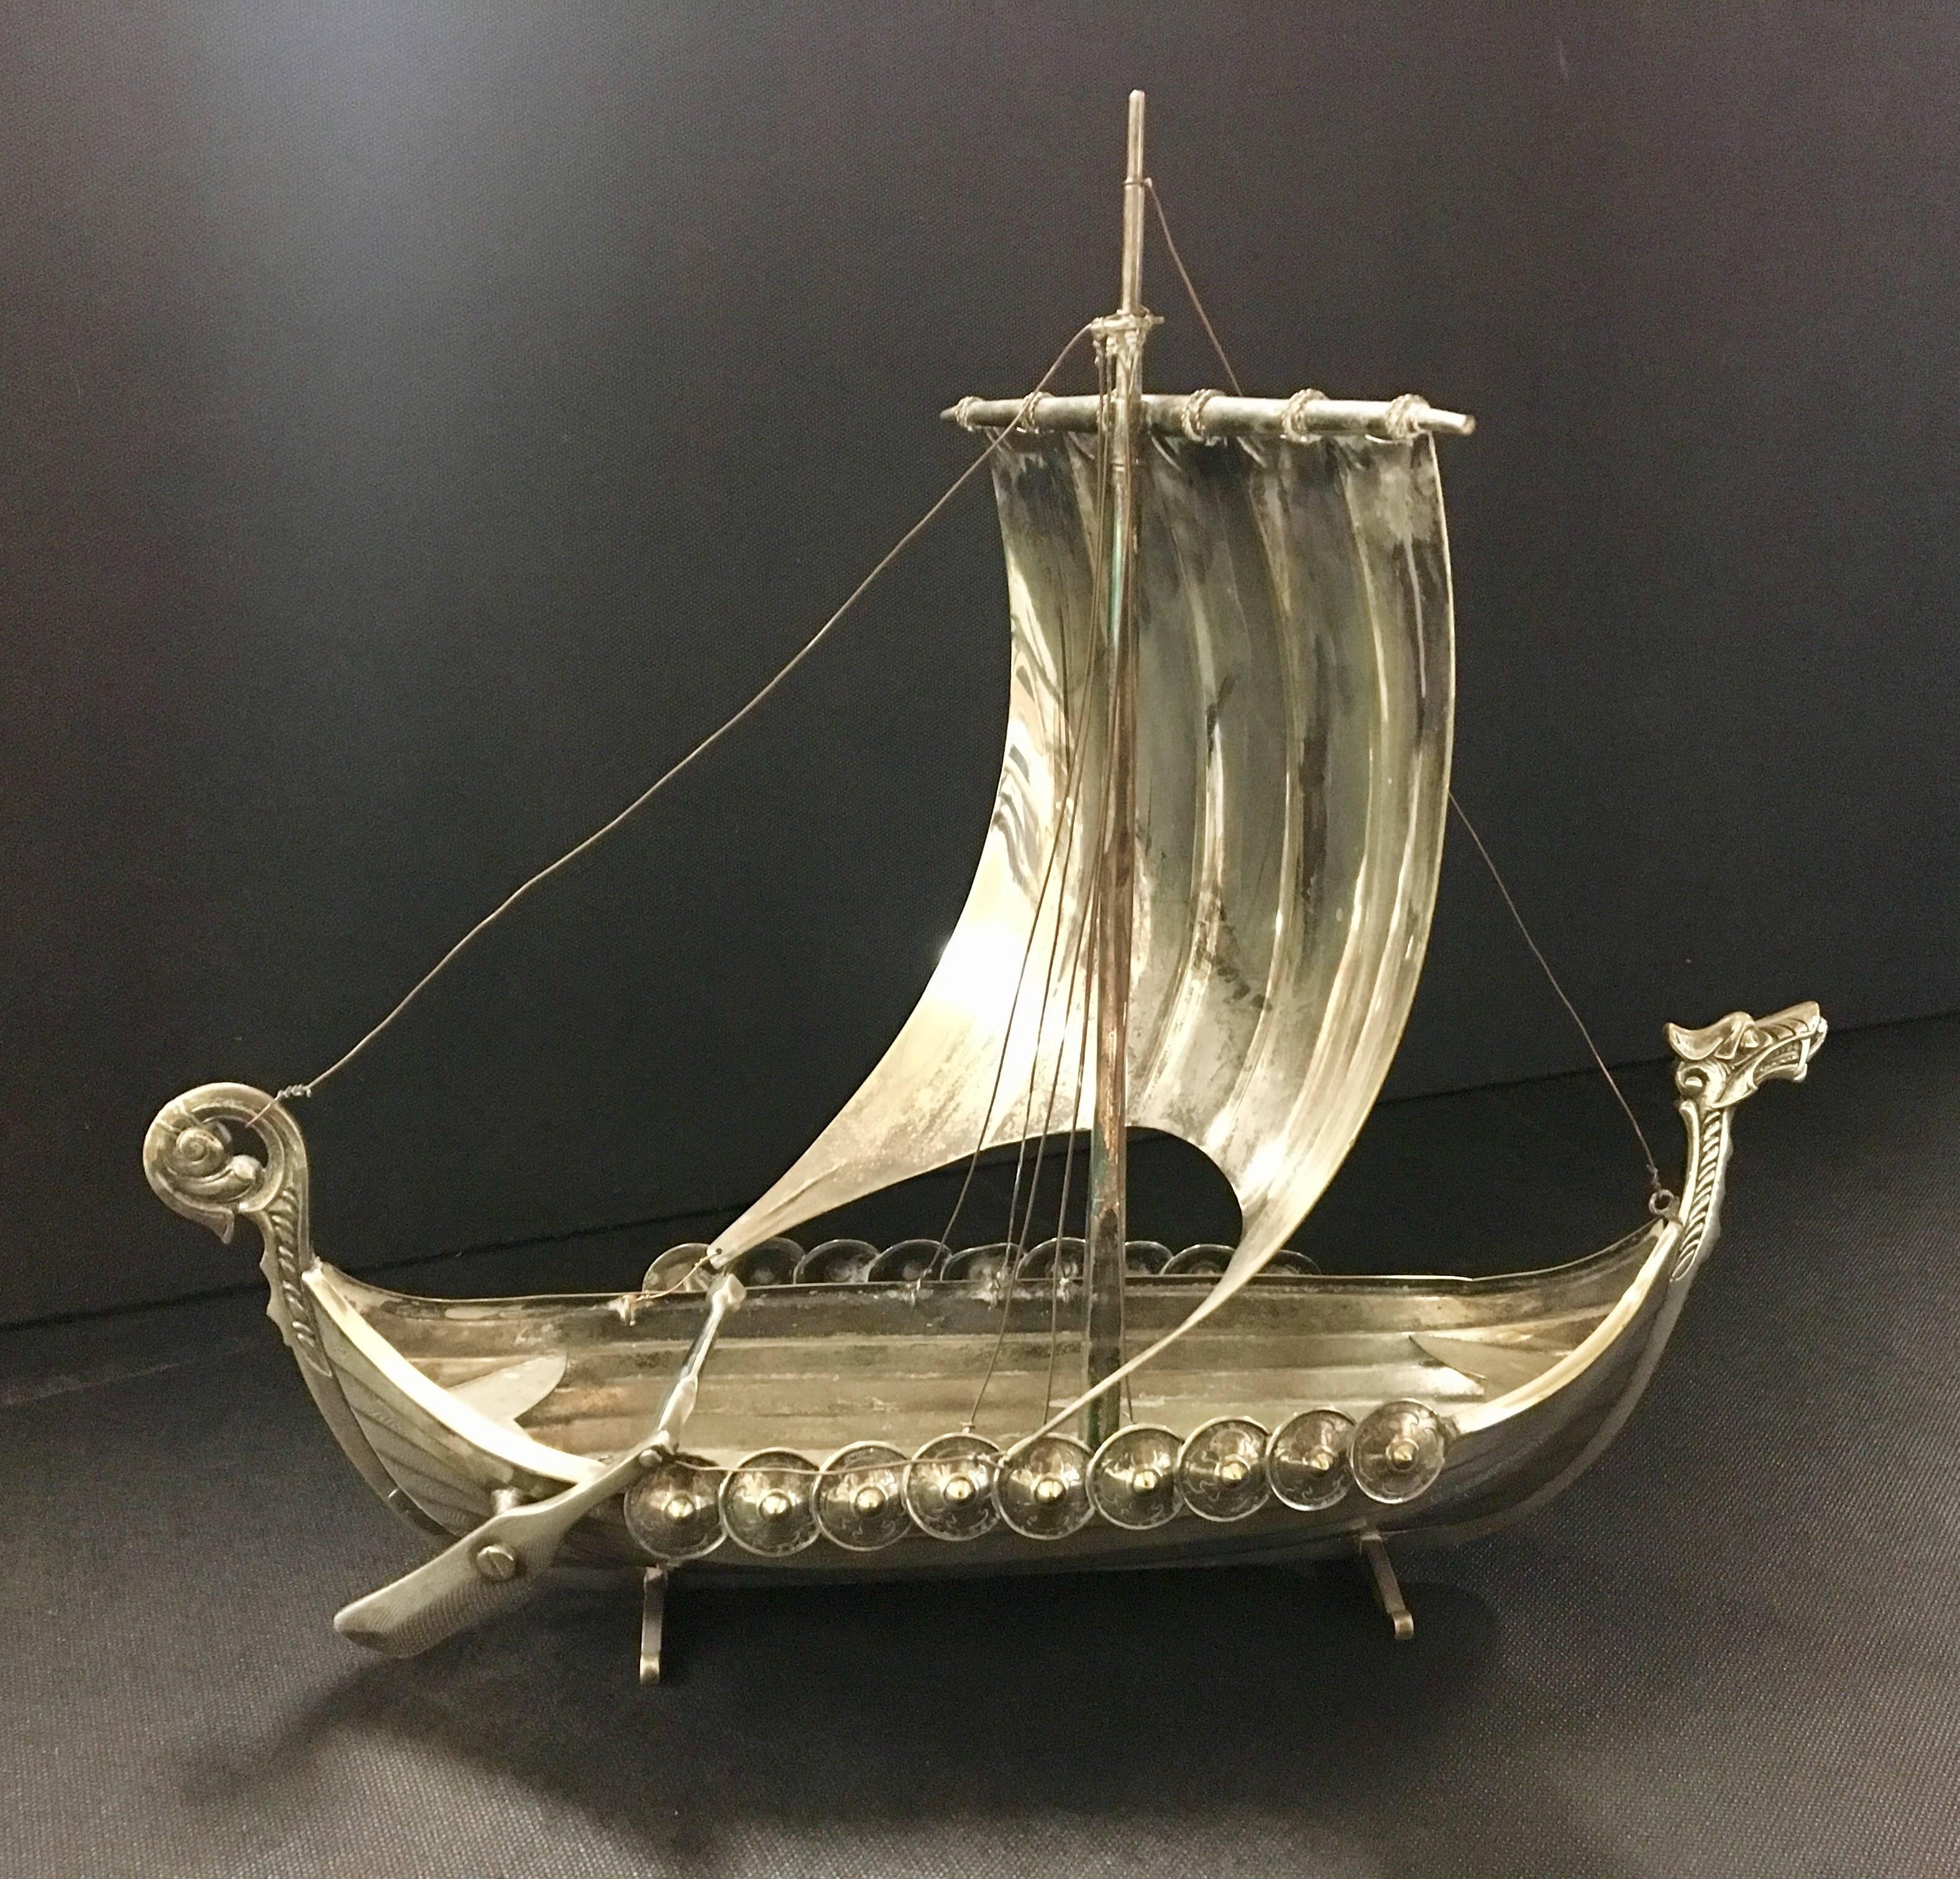 Excellent detail in this miniature, reproduction viking ship made of silver plate and brass. The ship has an excellent vintage patina and is stamped "Victoria".